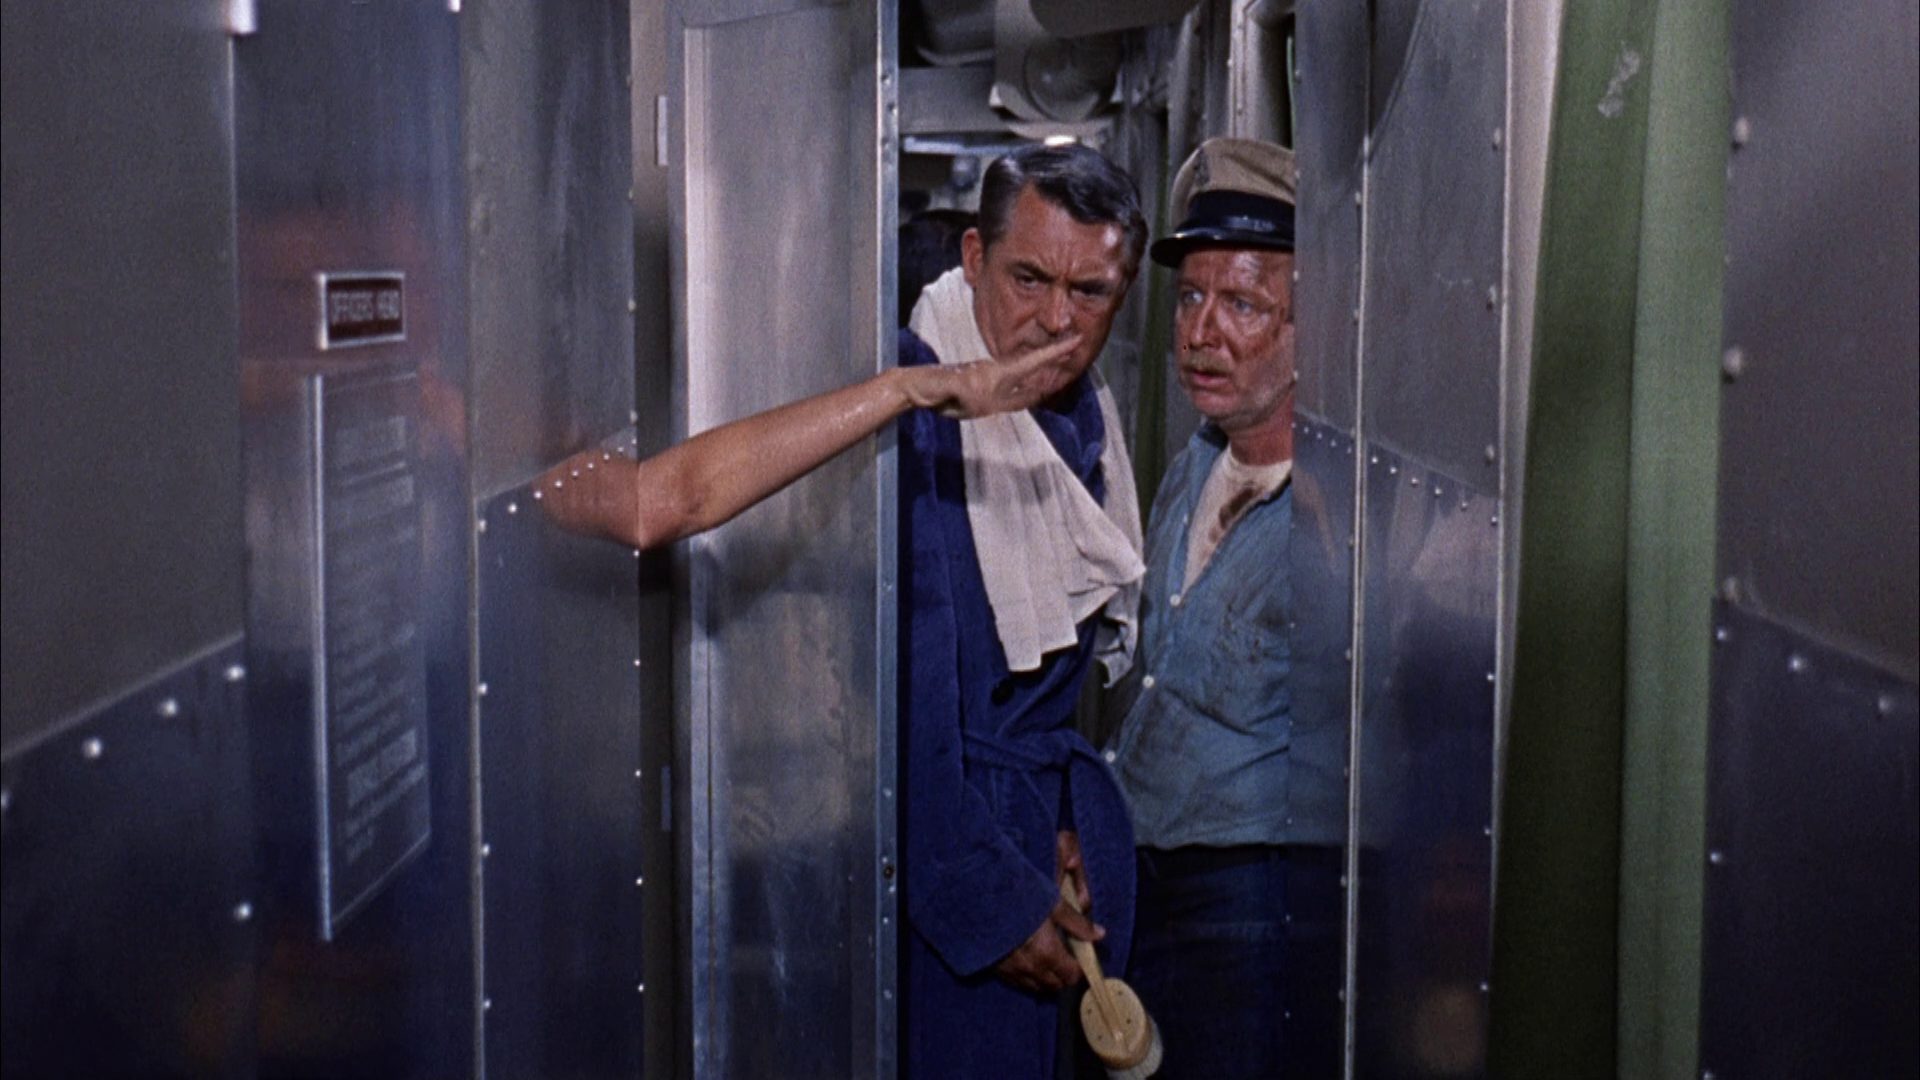 Cray Grant as a submarine captain in a bathrobe looks in the presence of one of his sailors in amazement at a woman's hand stretched out from the shower cubicle.